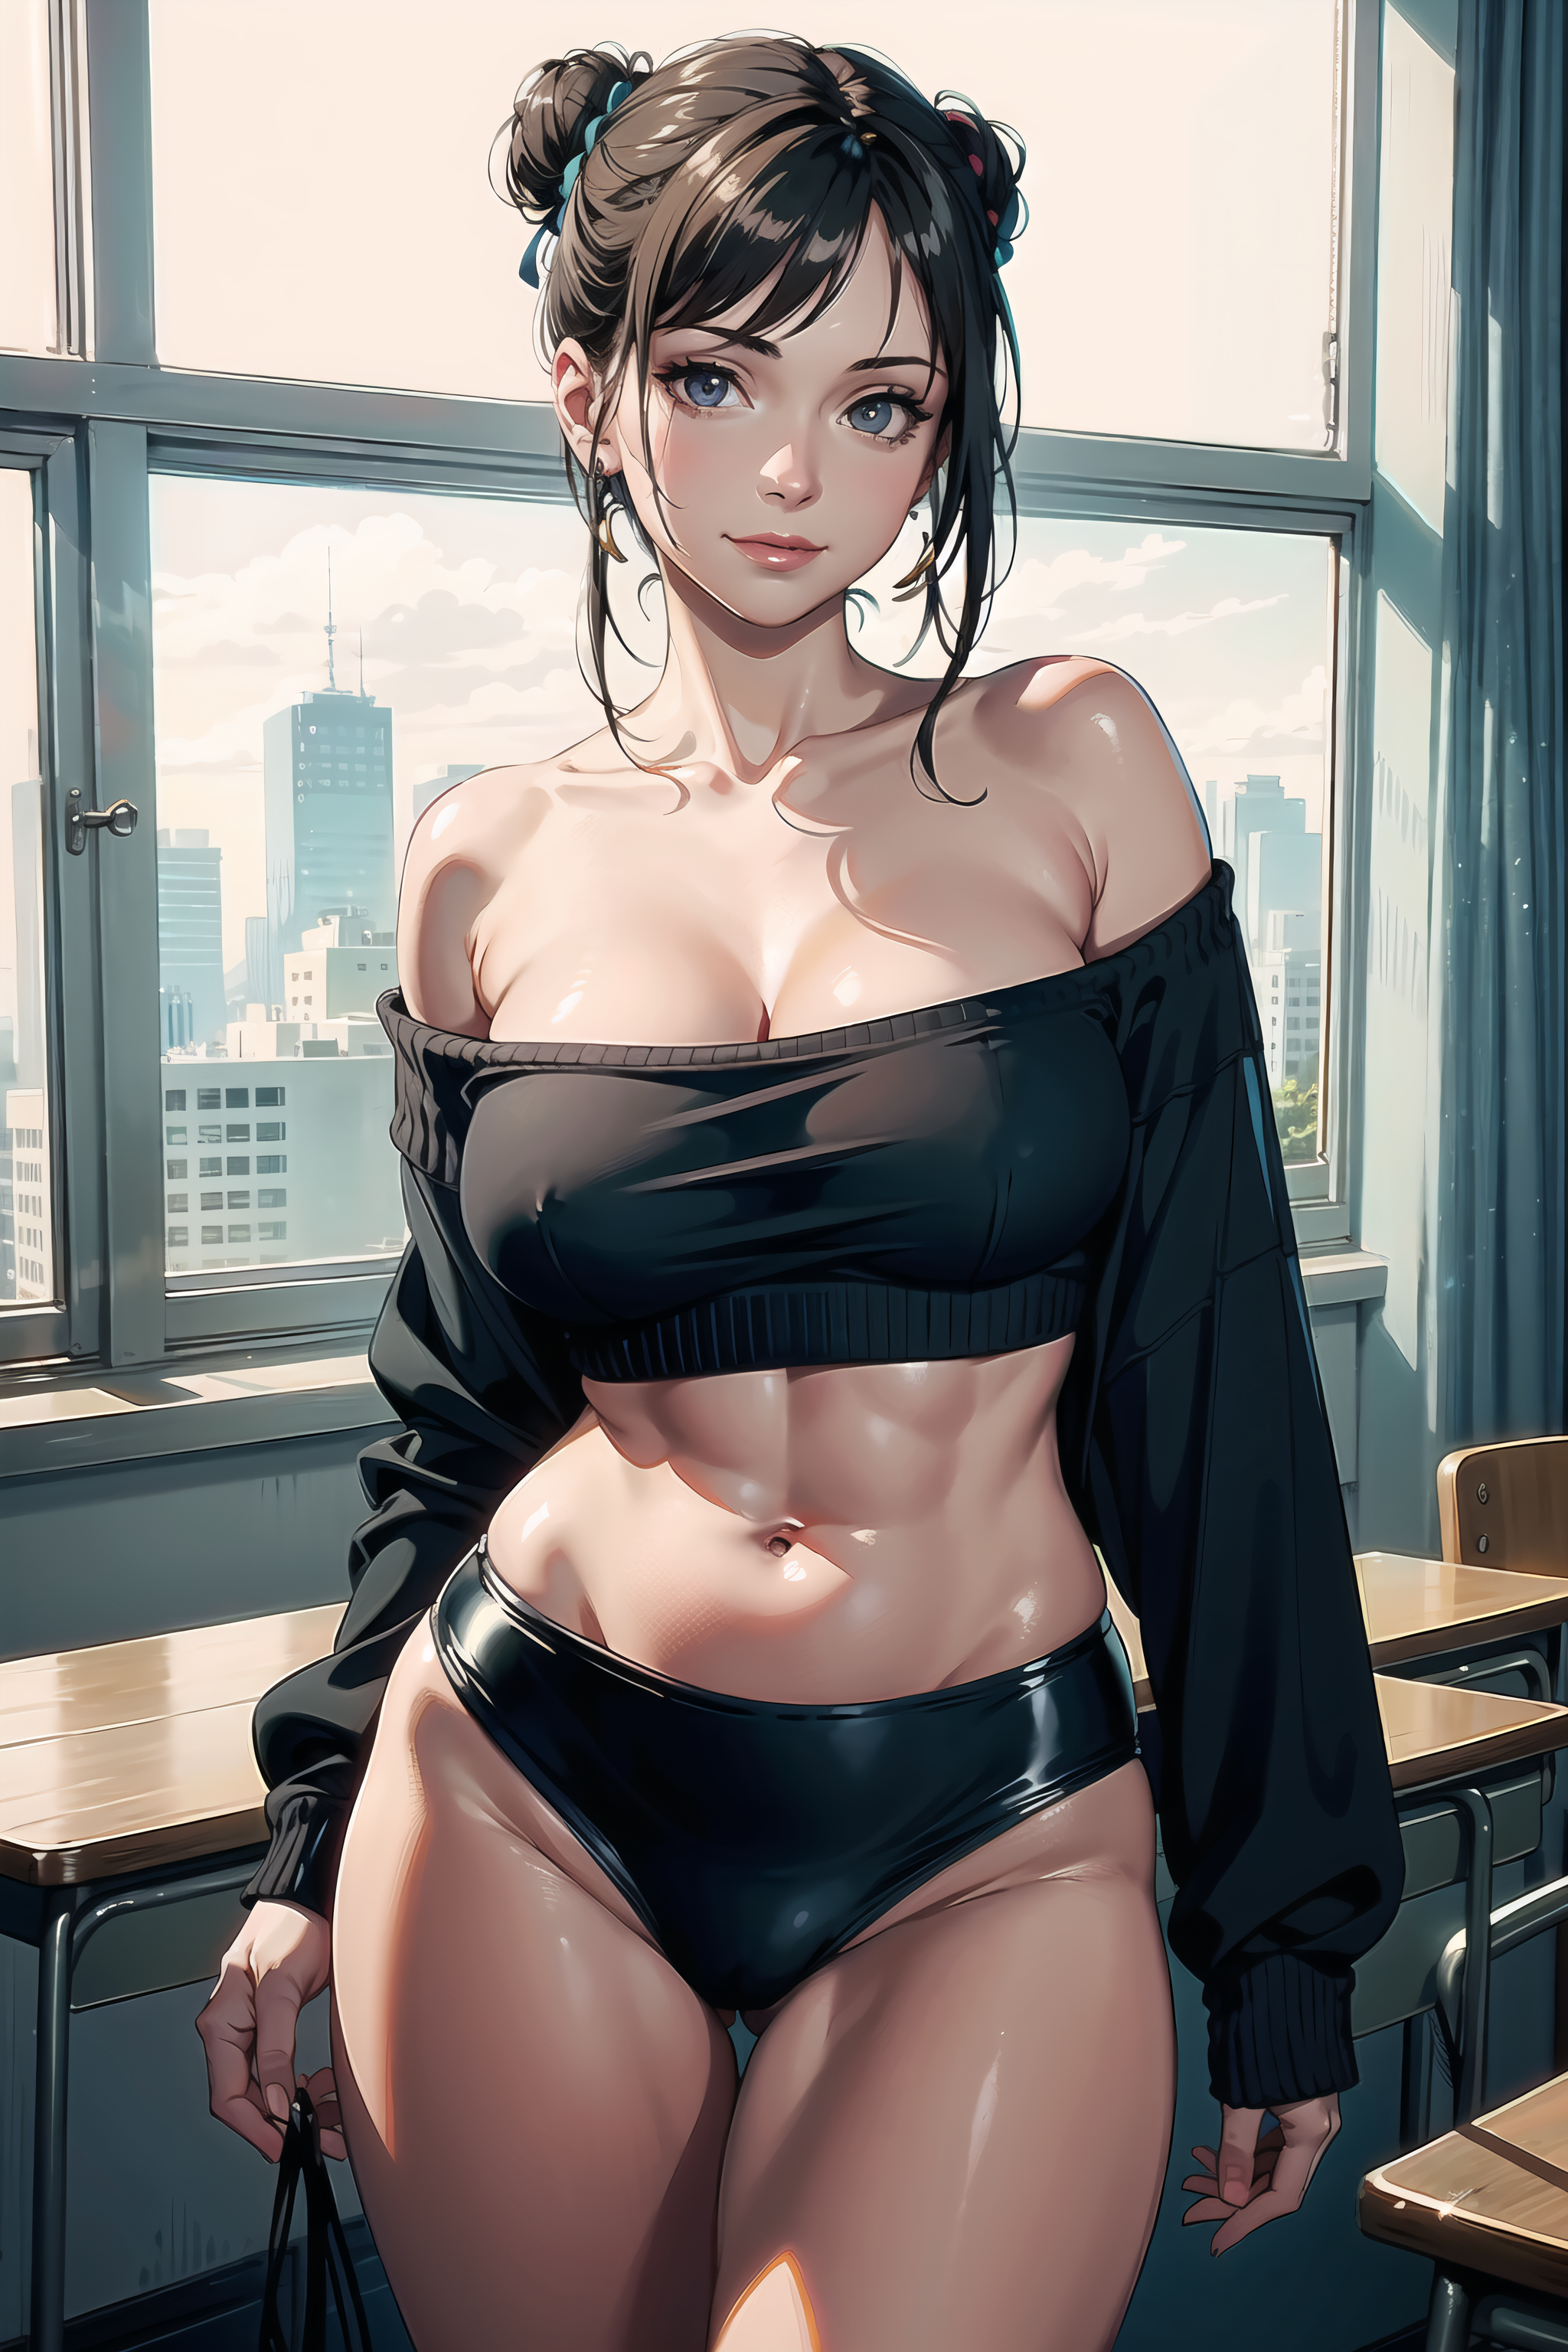 General 2048x3072 boobs AI art thighs portrait display window desk looking at viewer hairbun city smiling women belly button belly abs cleavage